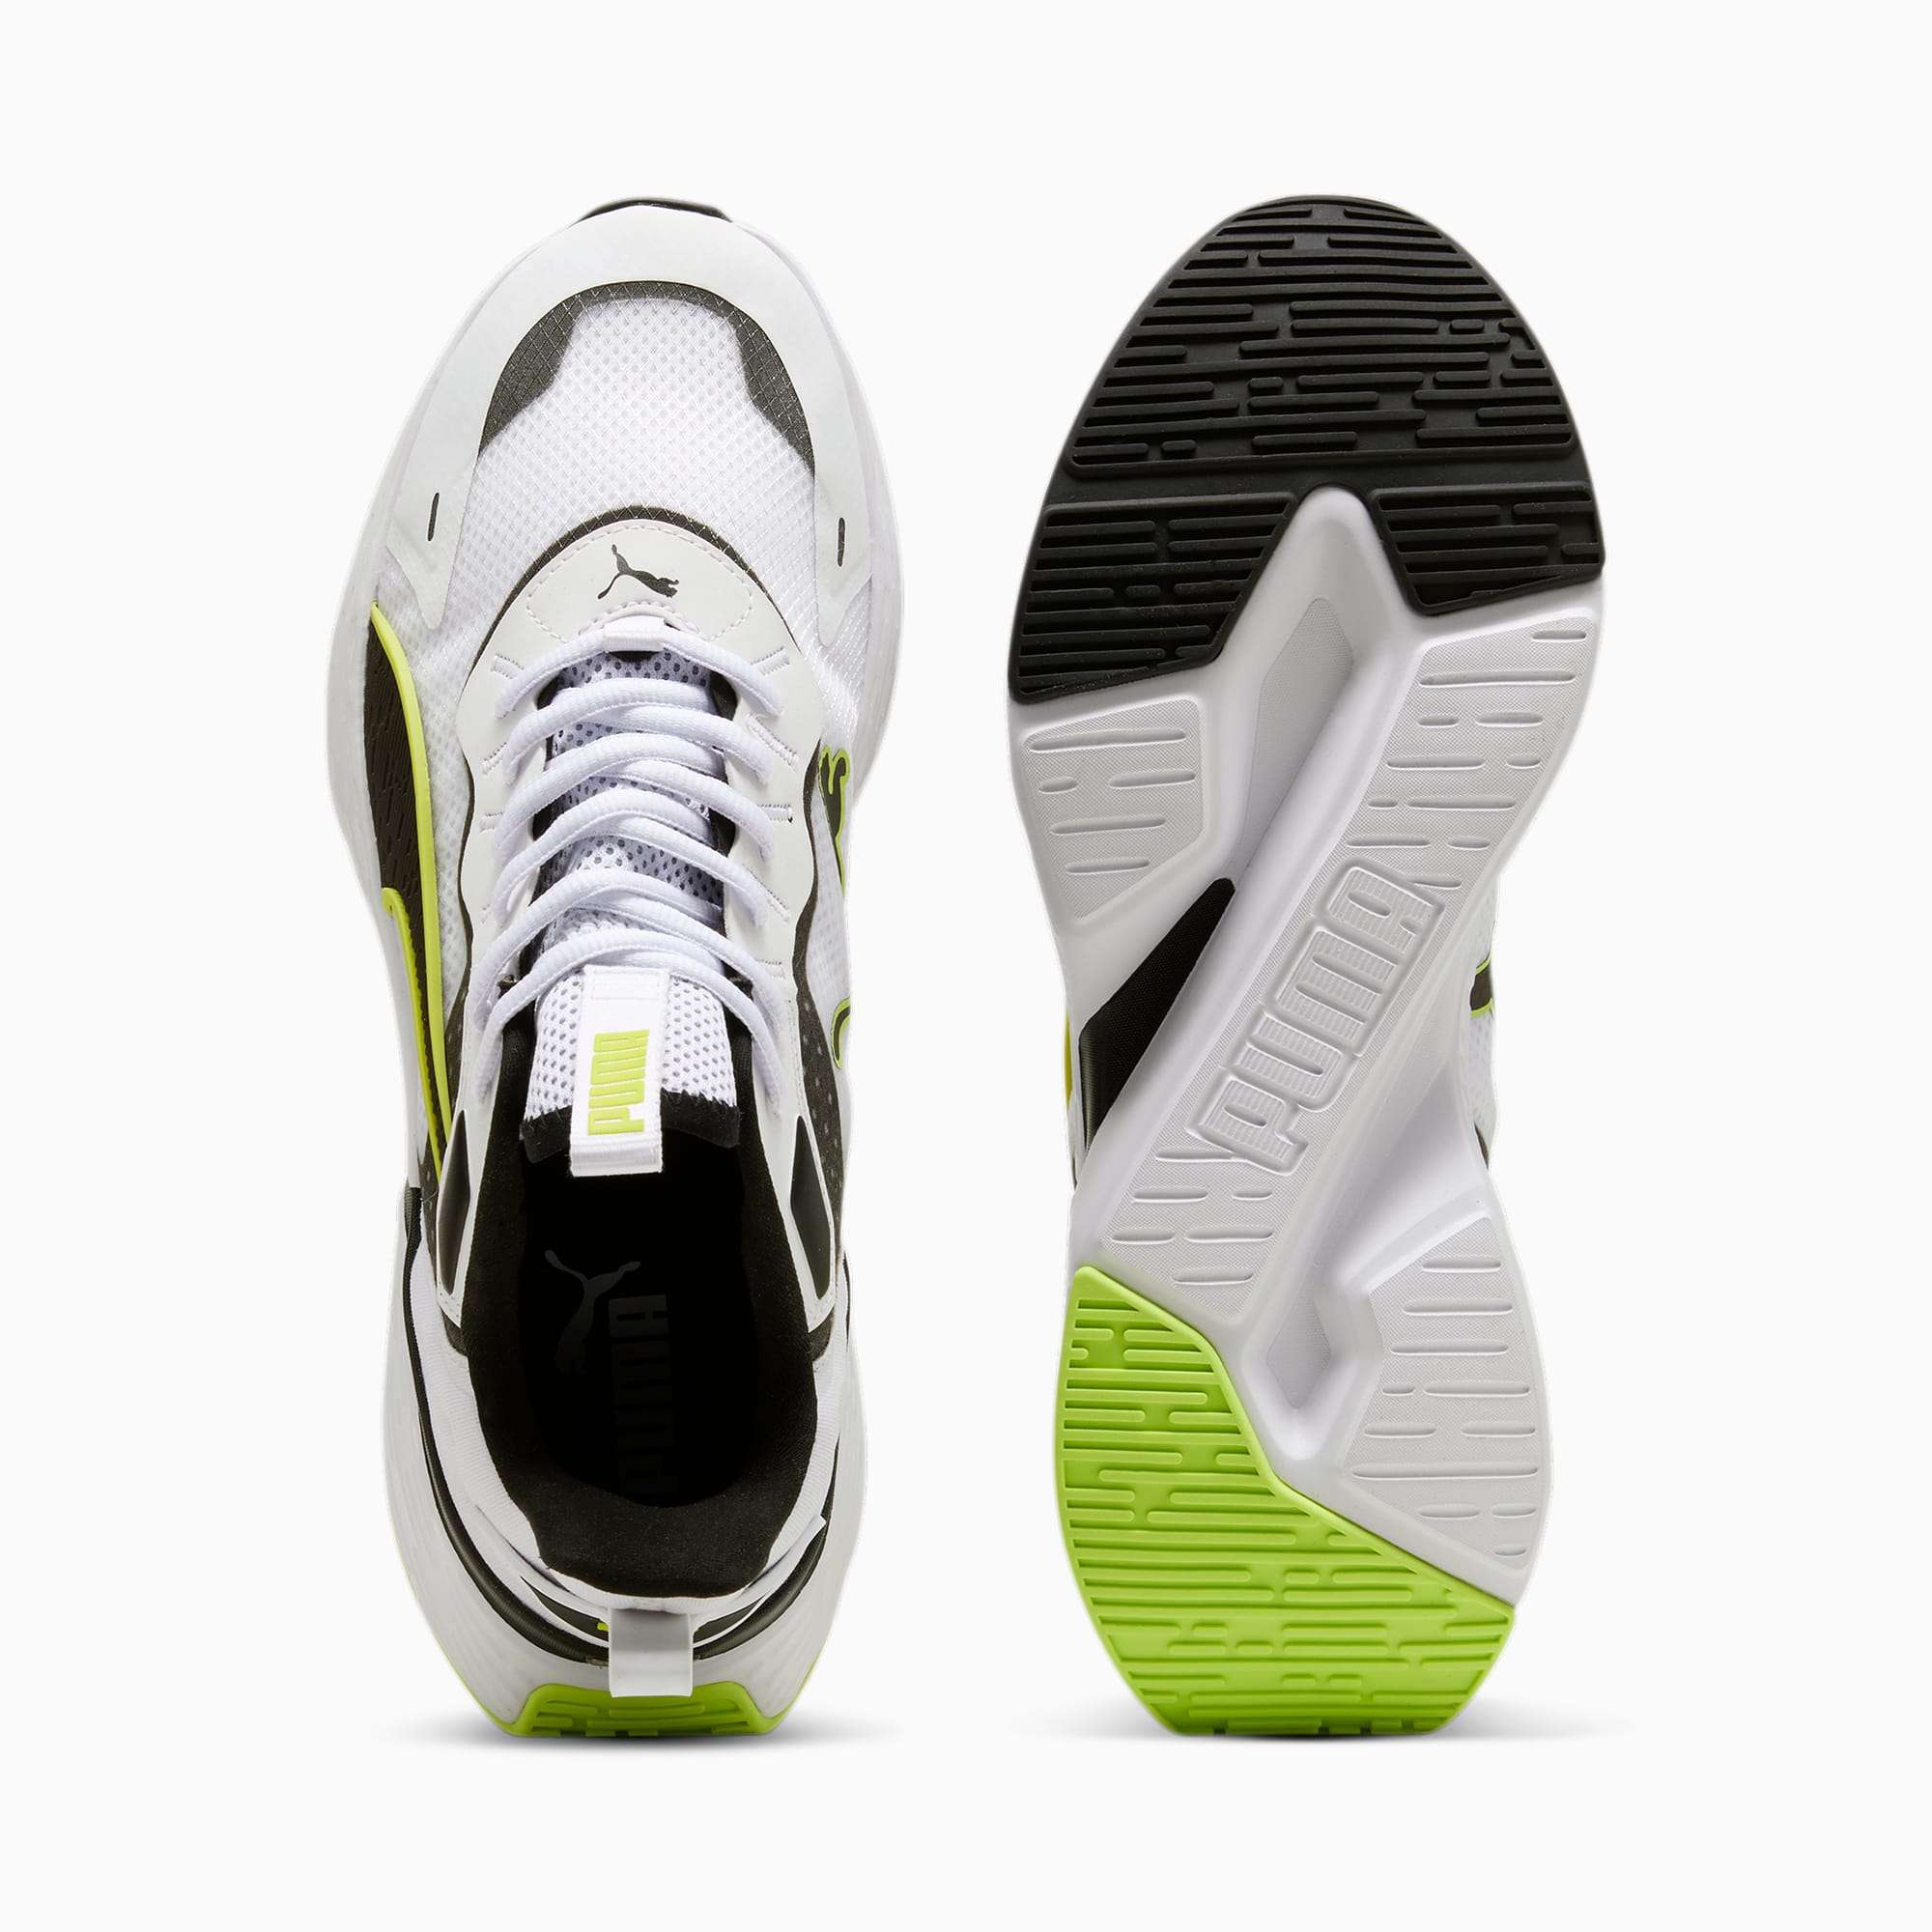 Women's PUMA Softride Sway Running Shoe, White/Black/Lime Pow, Size 35,5, Shoes